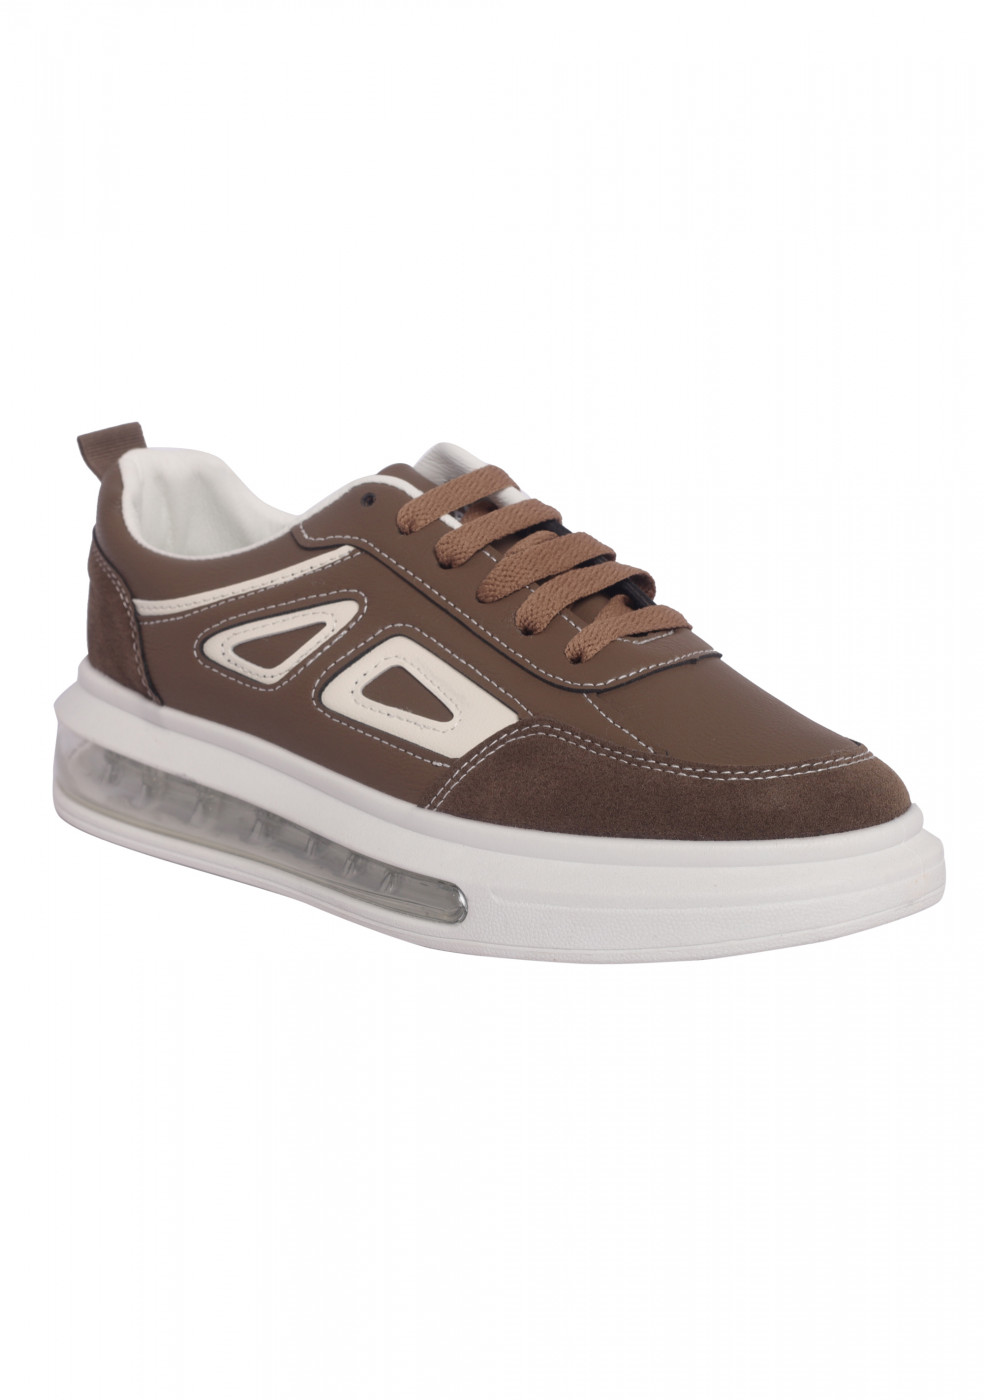 CEFIRO Brown Sneakers Shoes For Men